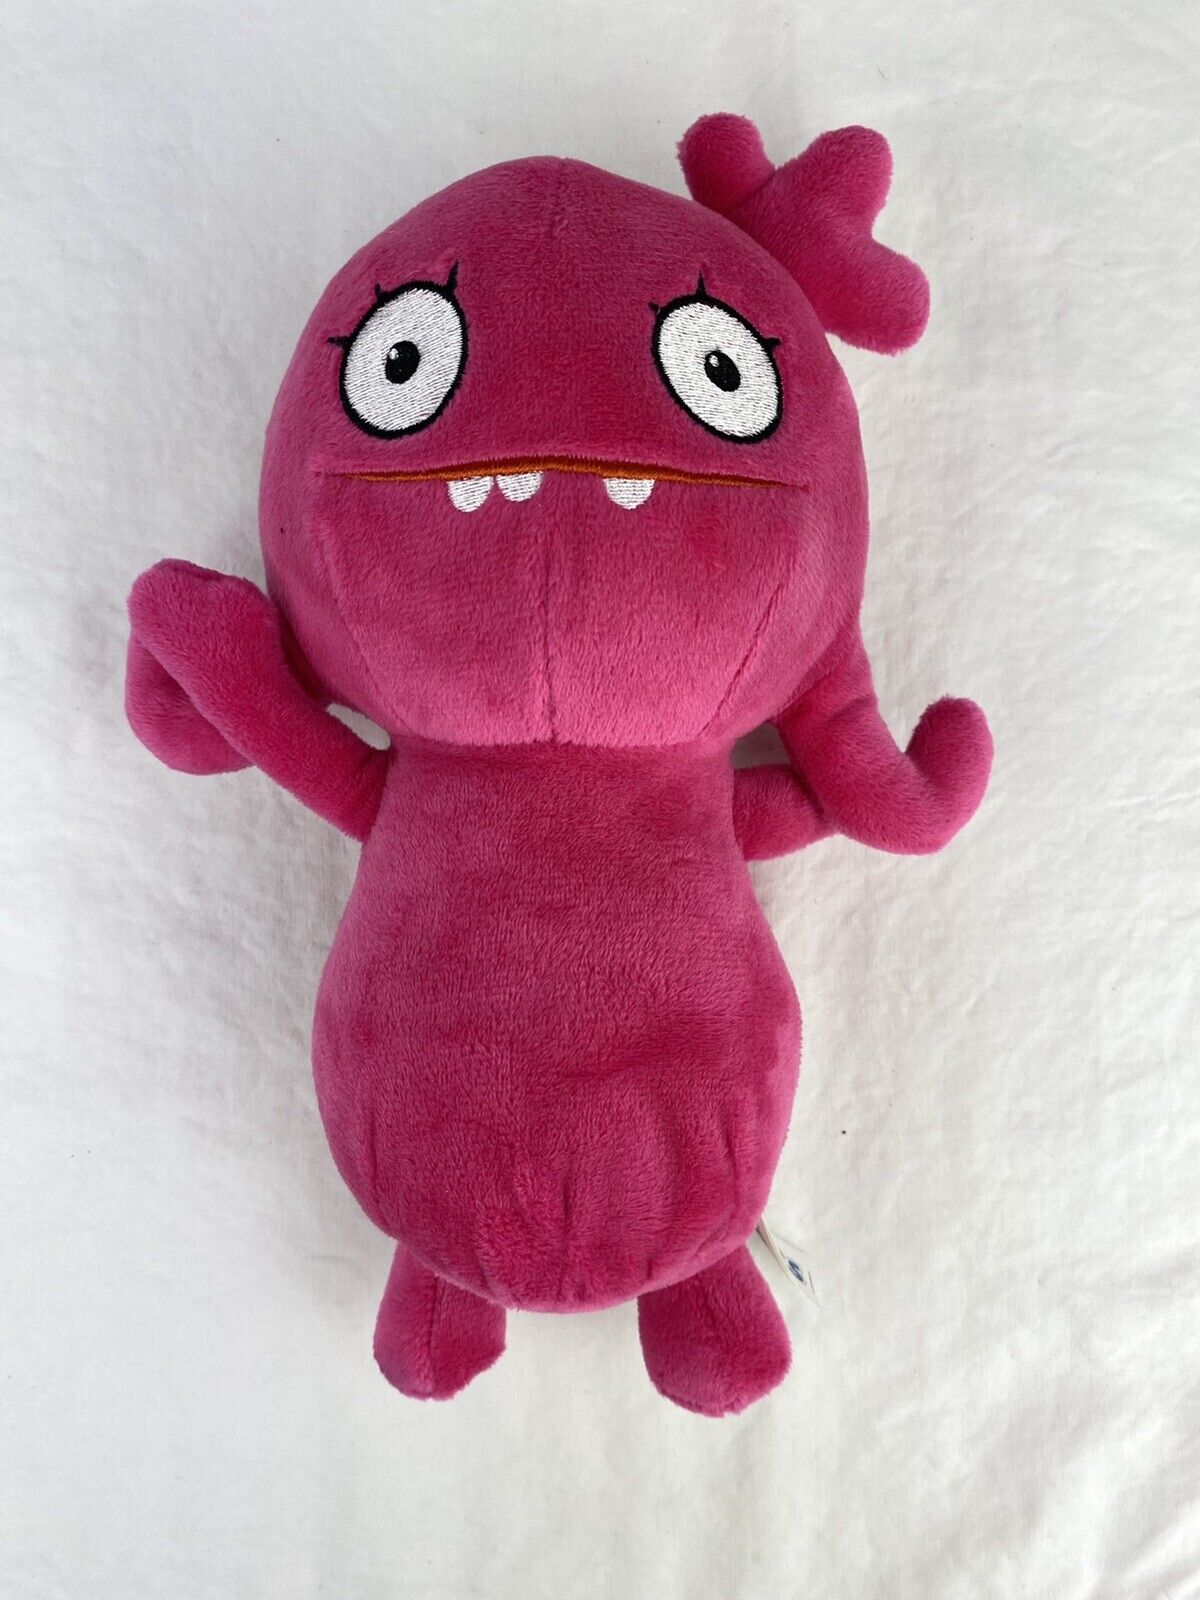 Ugly Industries Holdings Doll Moxy Pink Uglydolls 10